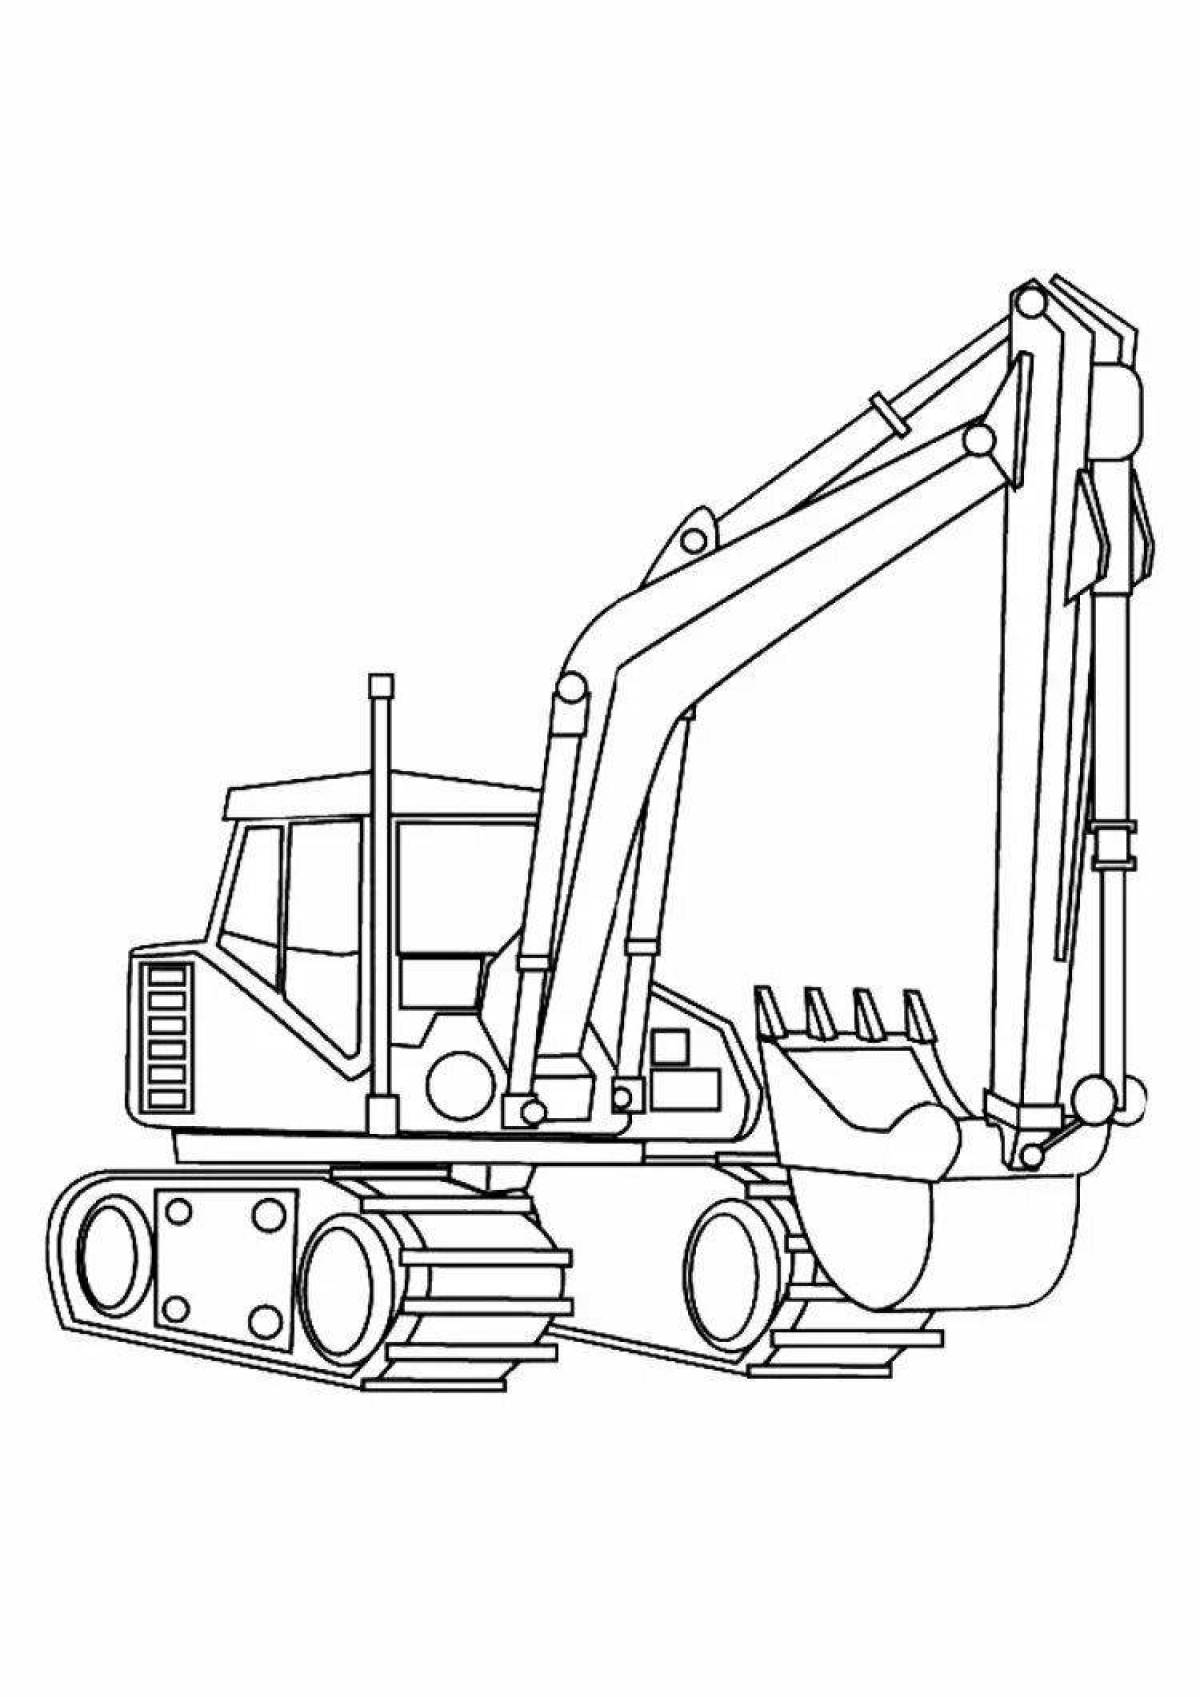 Stimulating coloring book excavator for preschoolers 2-3 years old